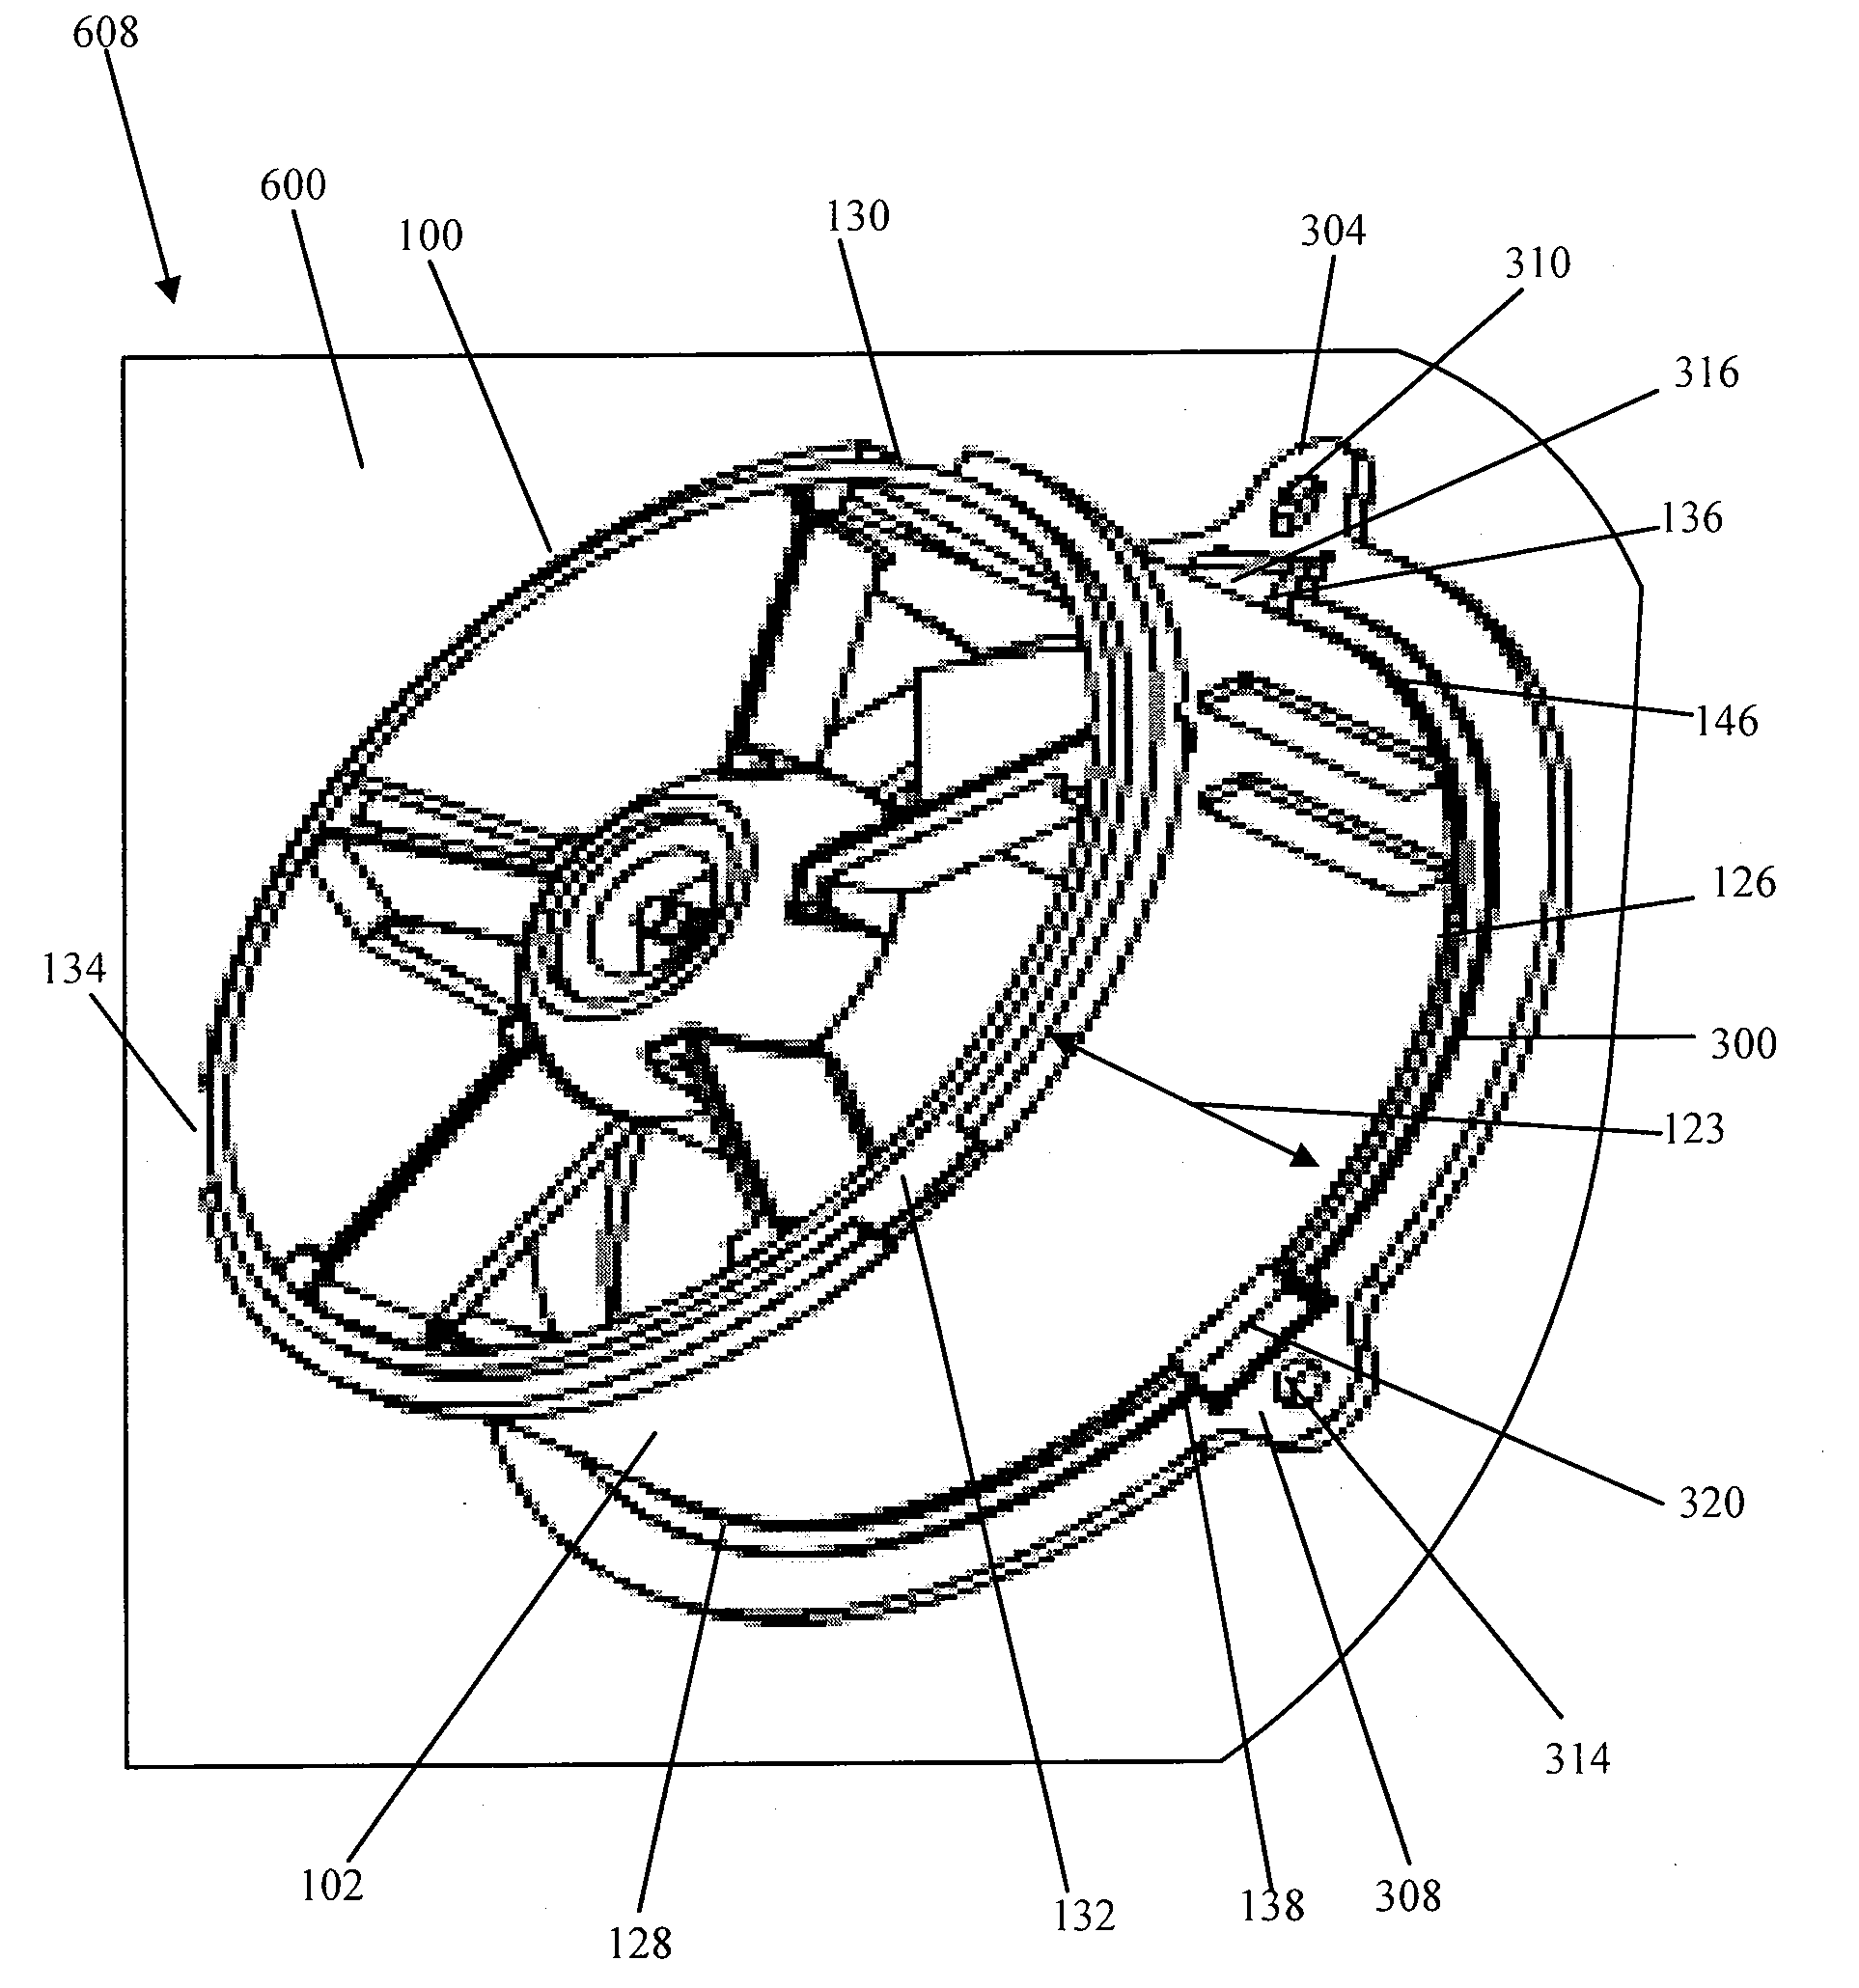 Fan with locking ring